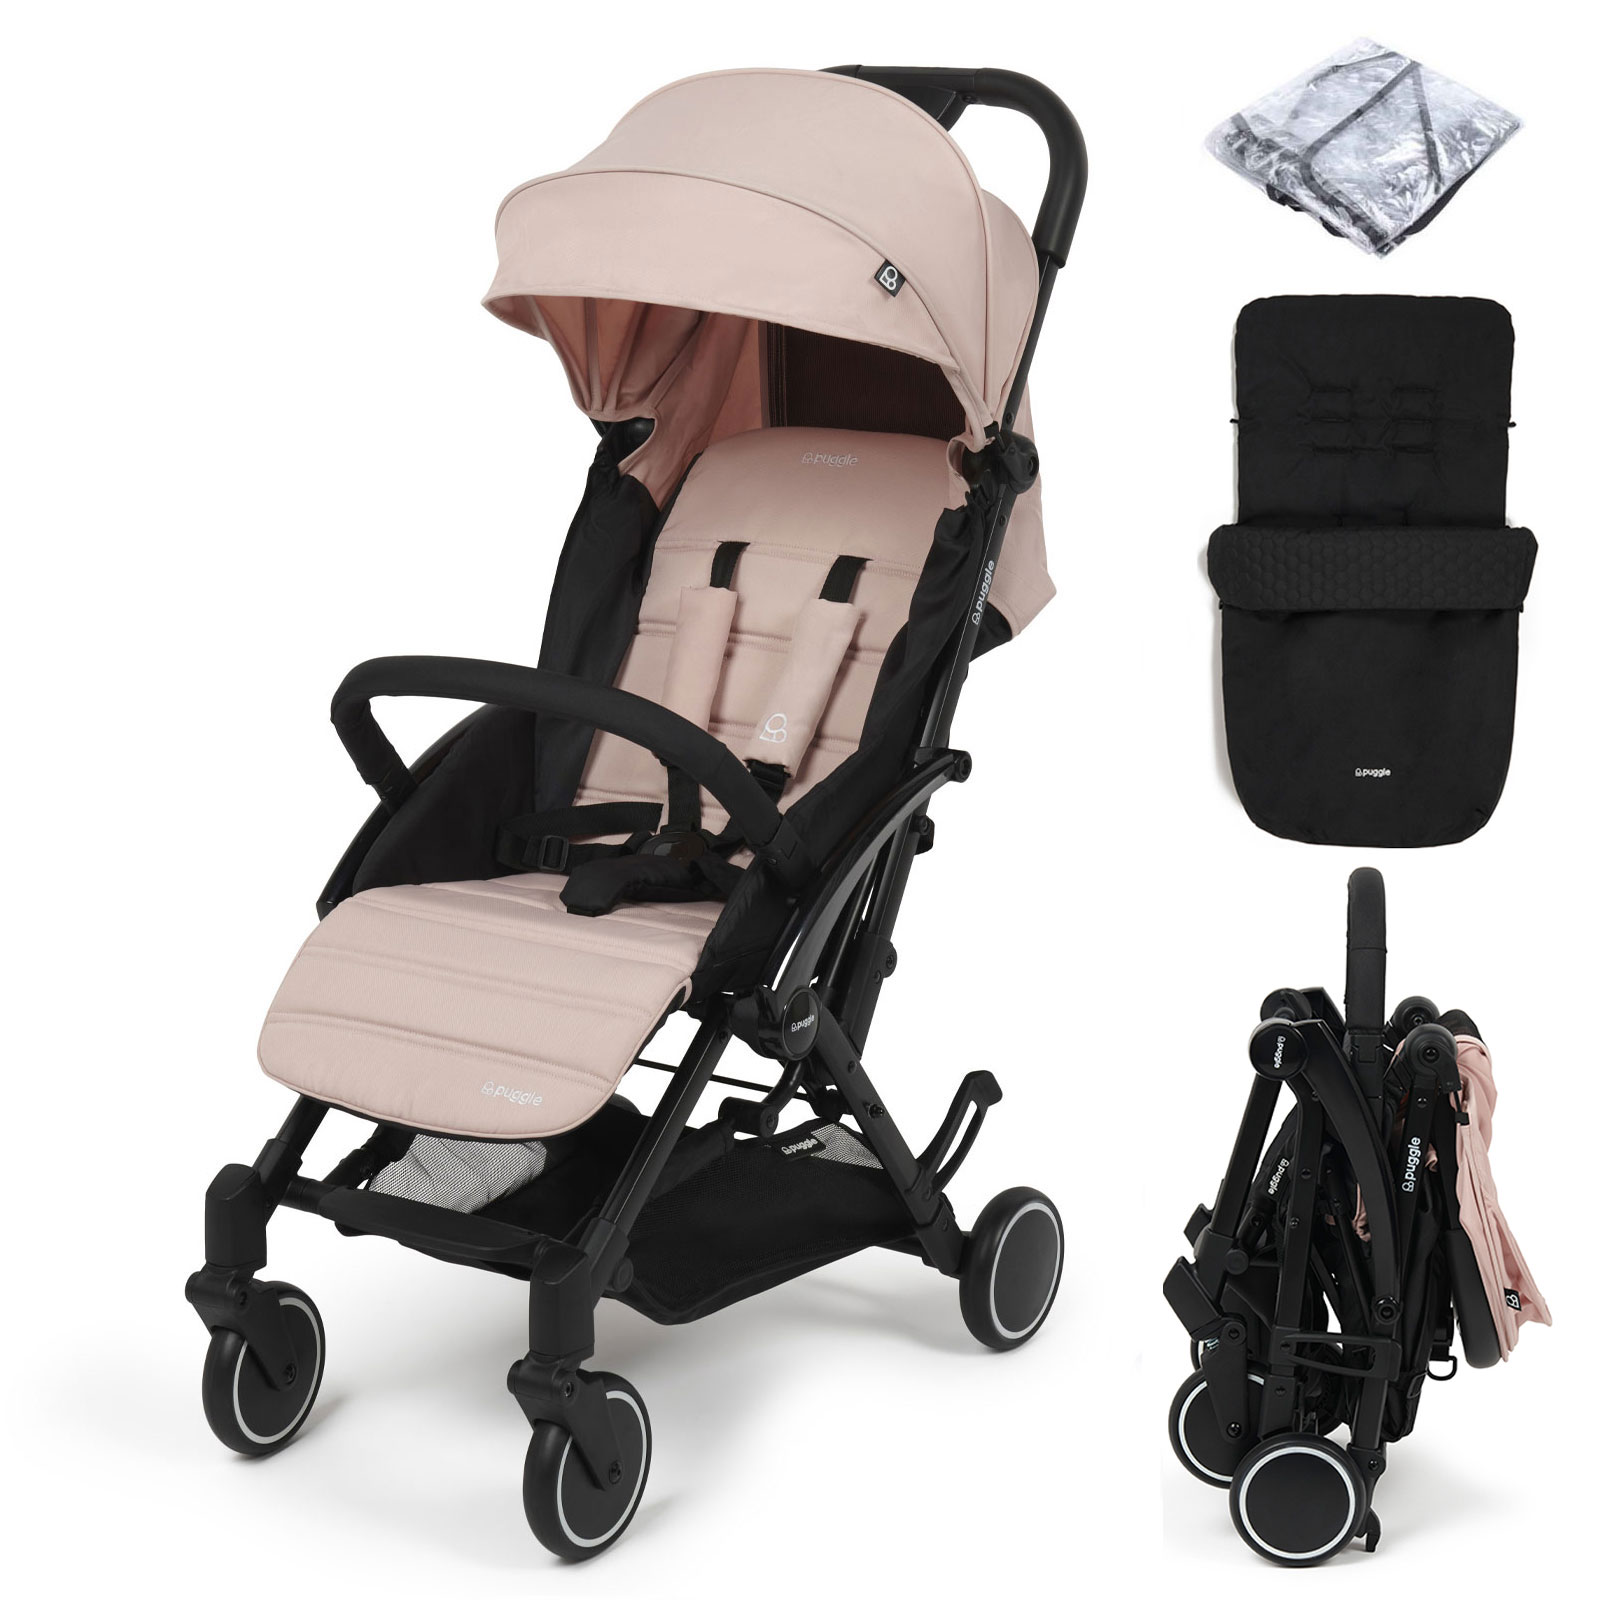 Puggle Seattle Fold & Go Compact Pushchair & Raincover With Honeycomb Footmuff - Blush Pink